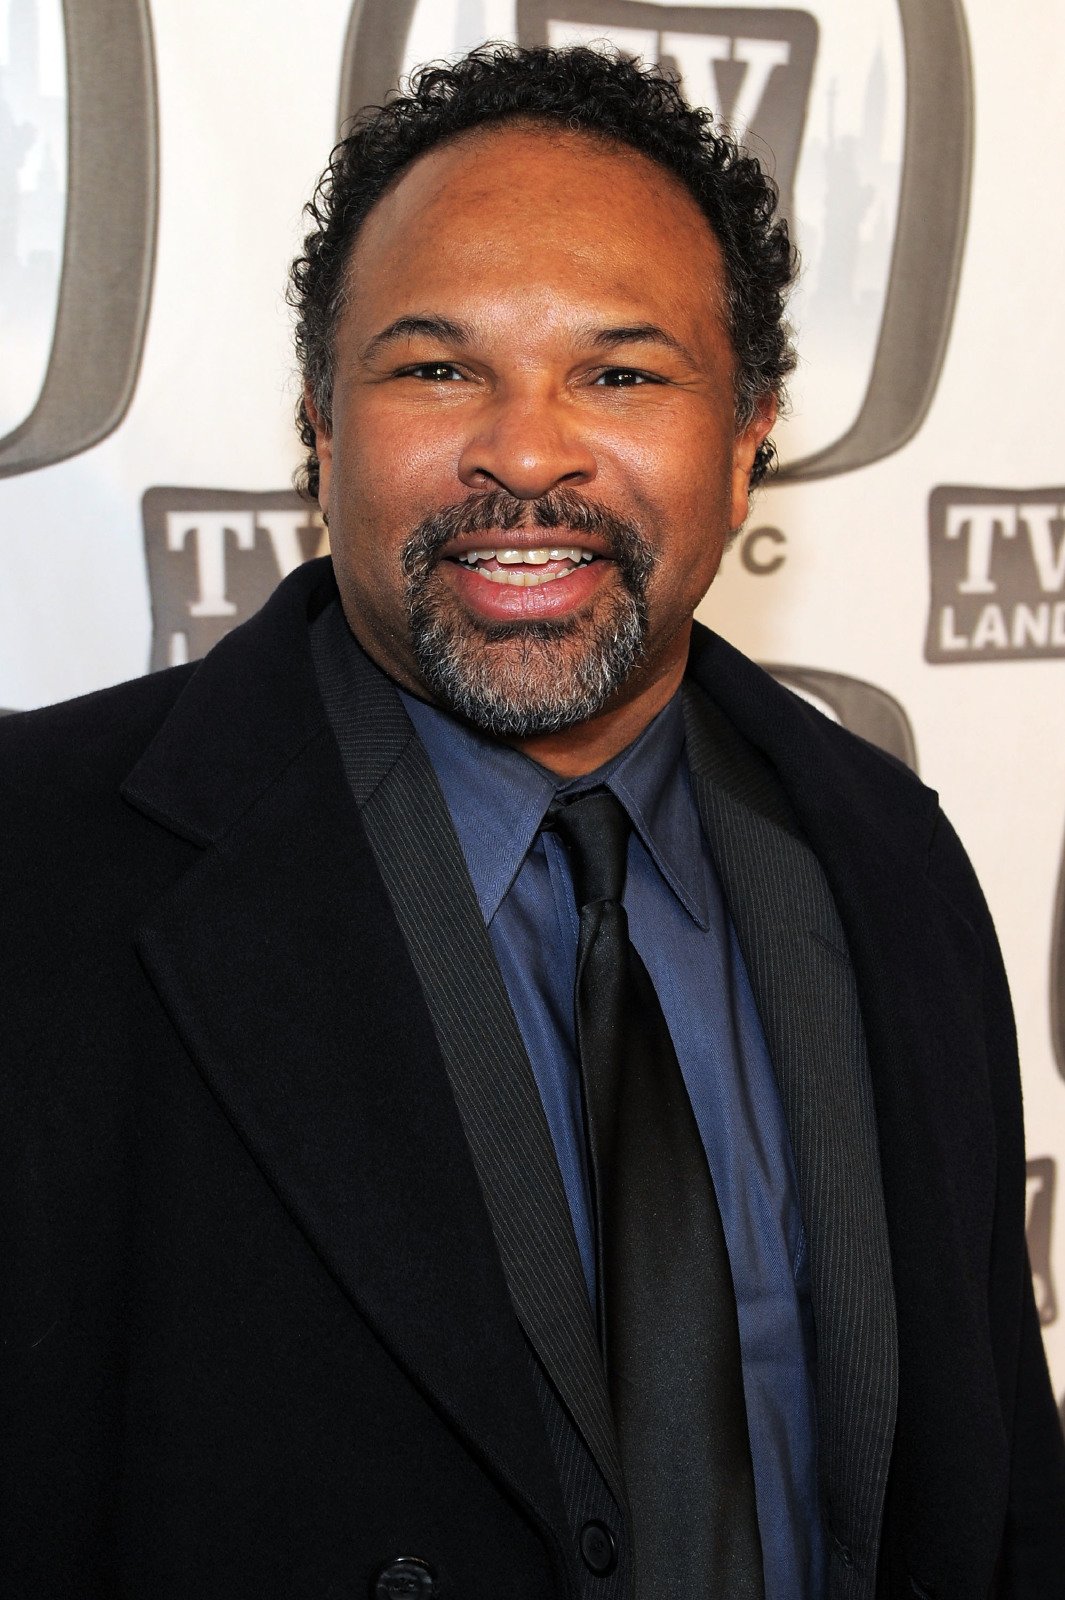 Geoffrey Owens at the 9th Annual TV Land Awards at the Javits Center on April 10, 2011 | Photo: Getty Images